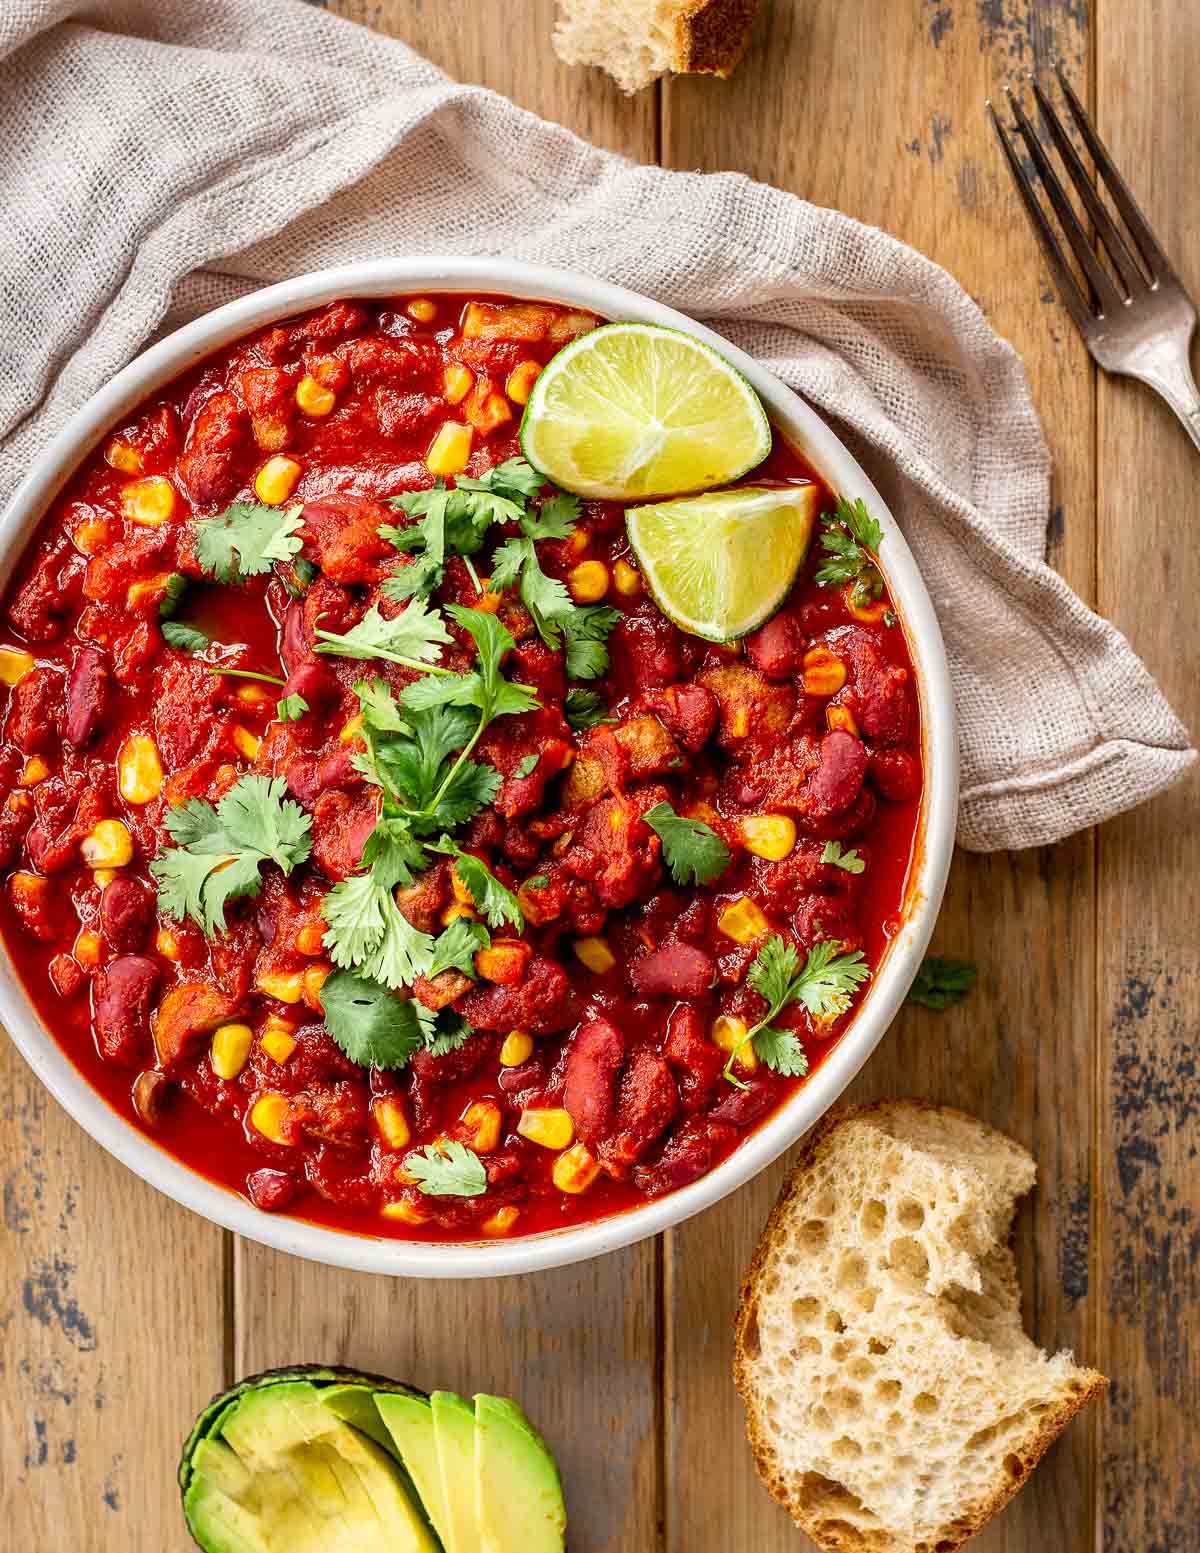 Quick Vegan Meals in 30 Minutes - Hearty Bean Chili